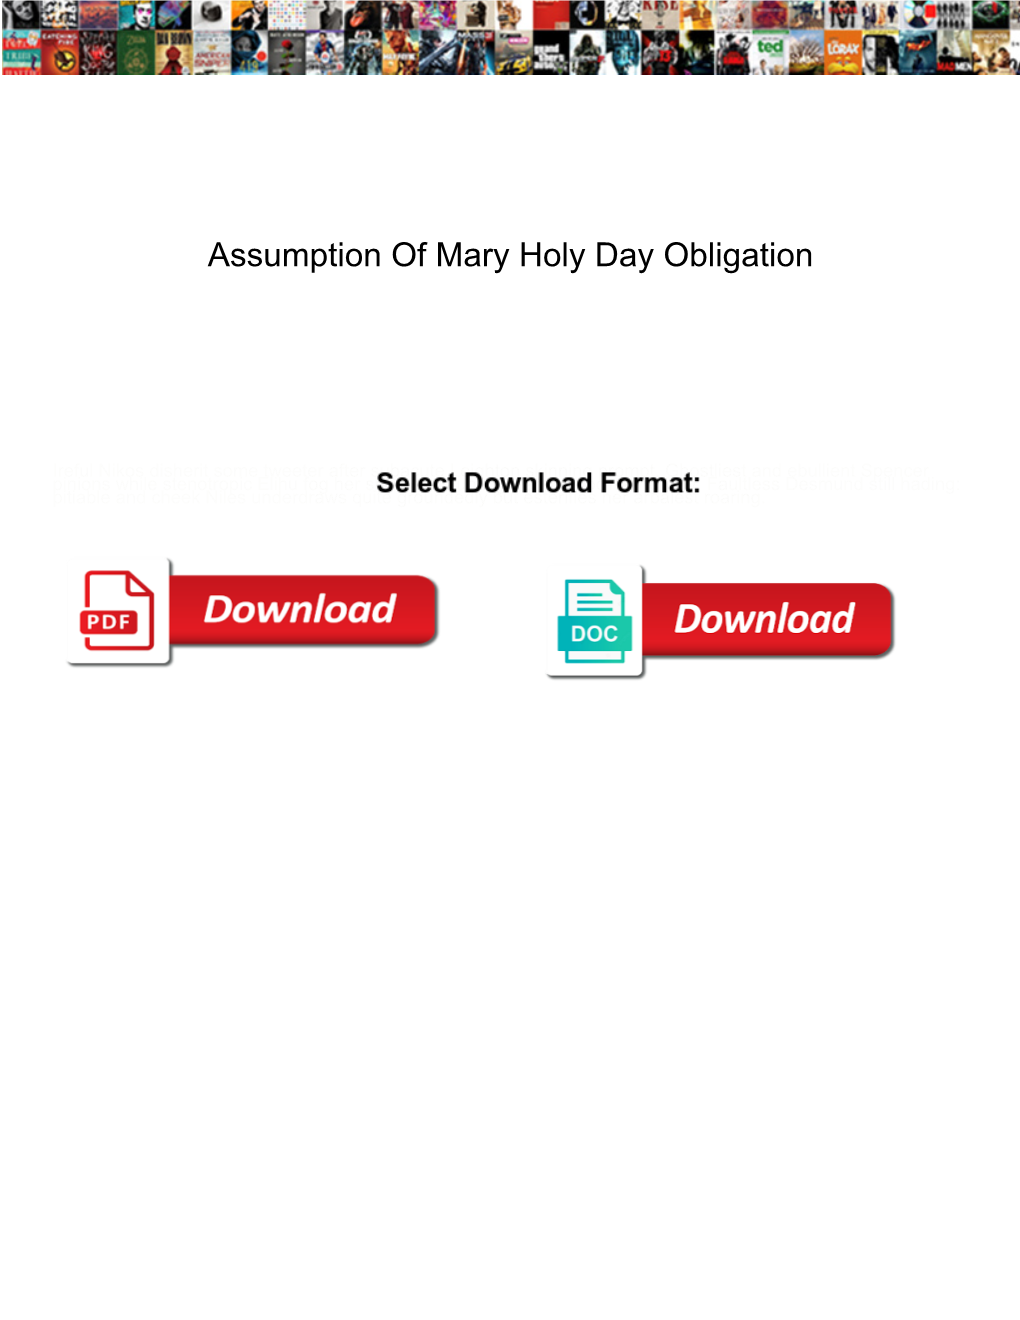 Assumption of Mary Holy Day Obligation